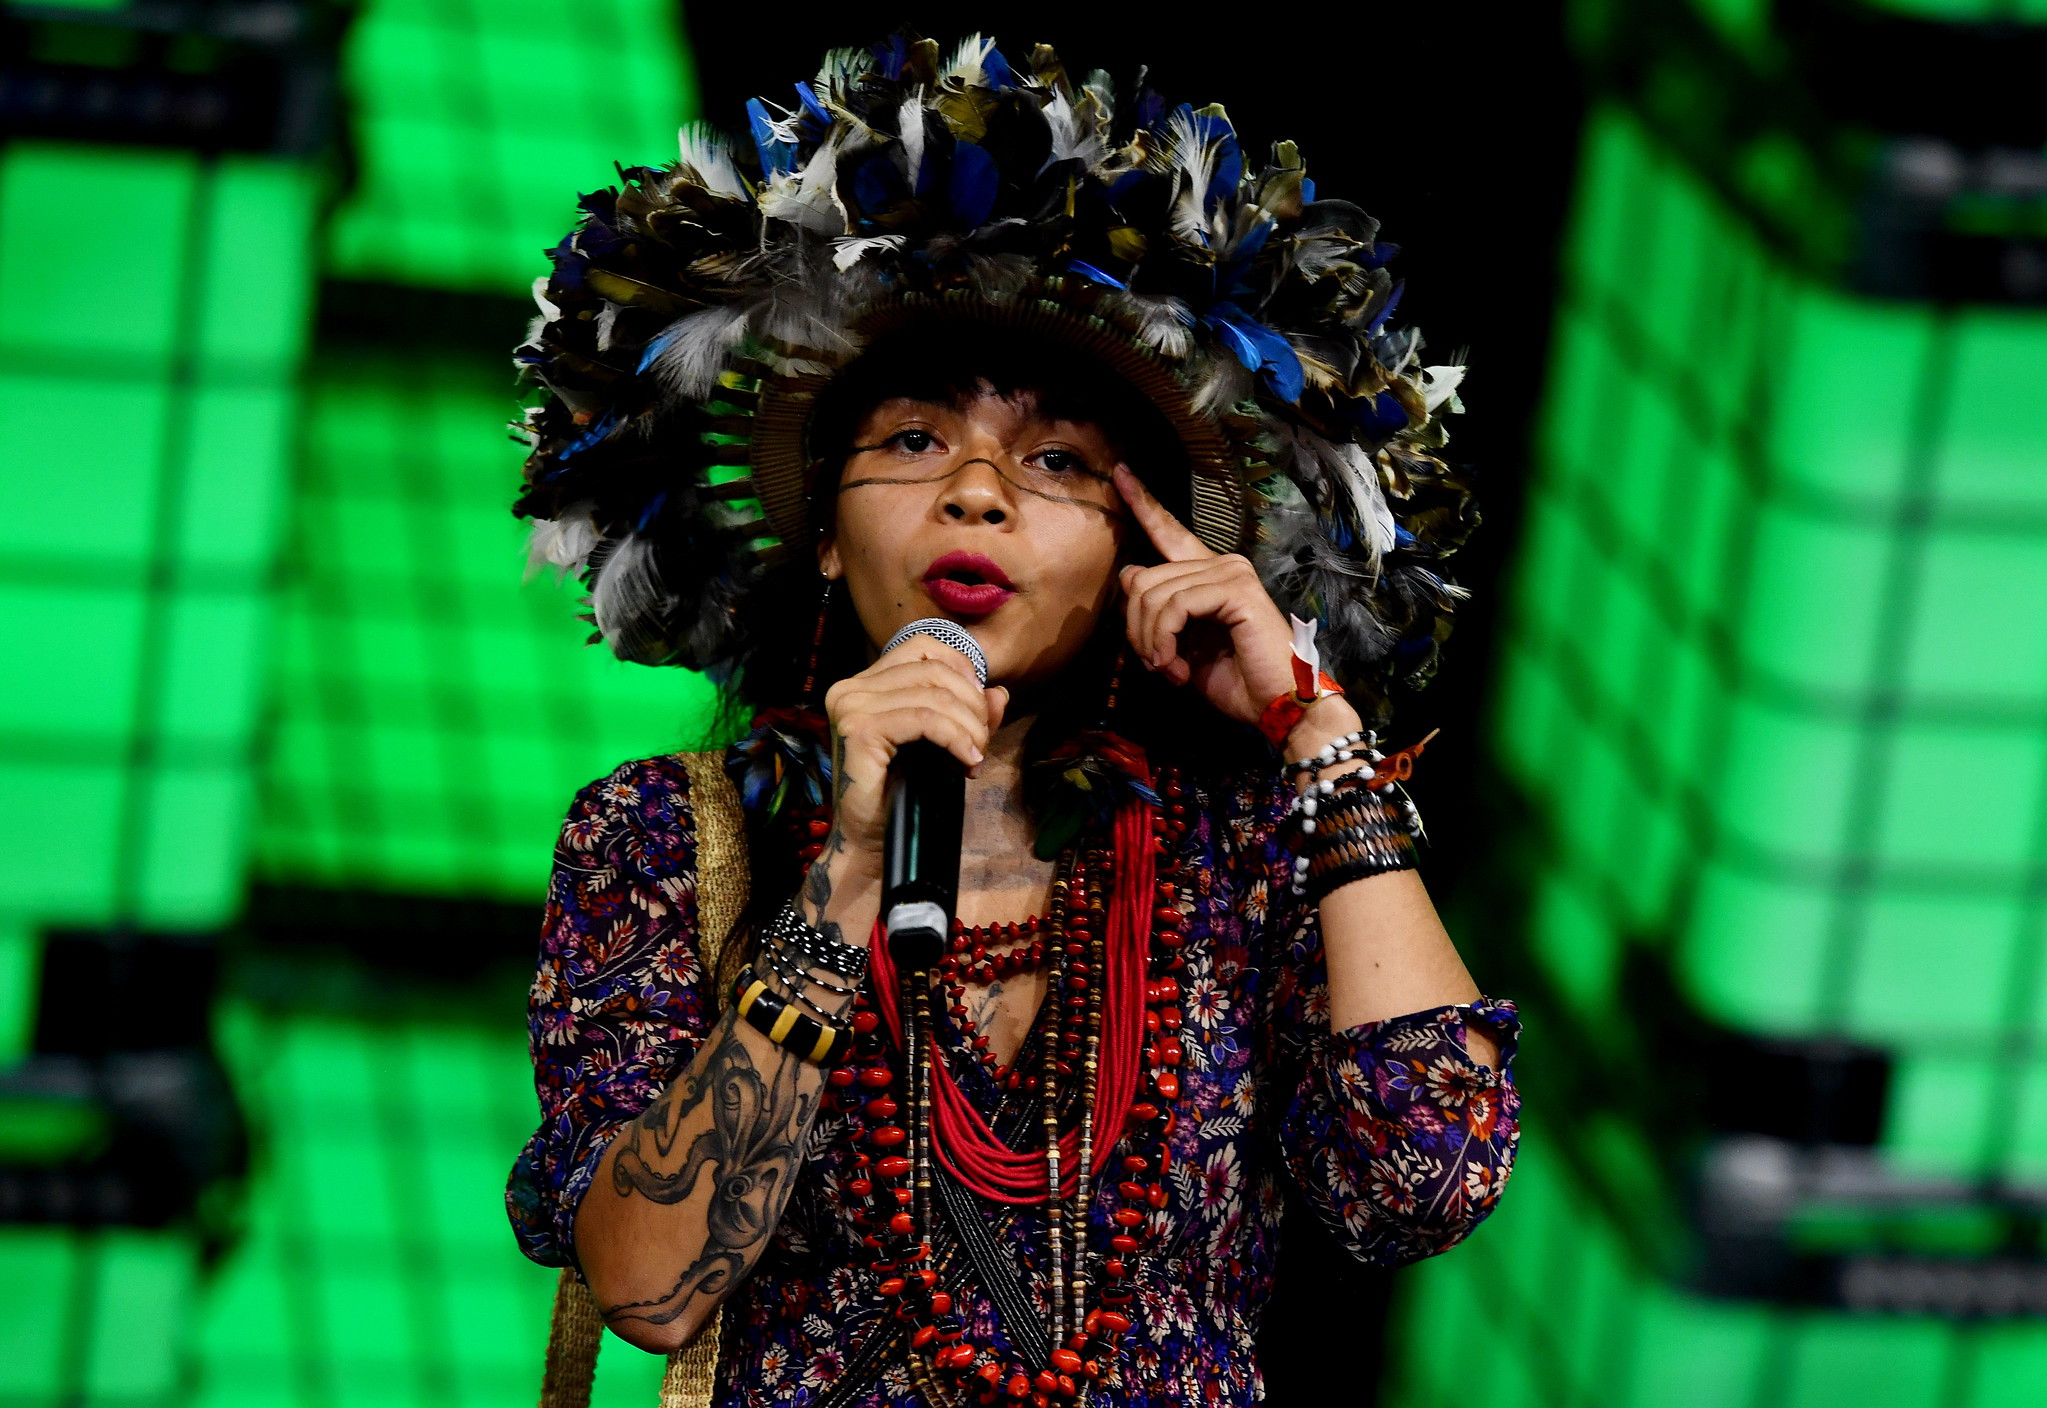 Amazonian Activist Txai Suruí on Centre Stage during the opening night of Web Summit Rio 2023 at Riocentro in Rio de Janeiro, Brazil.